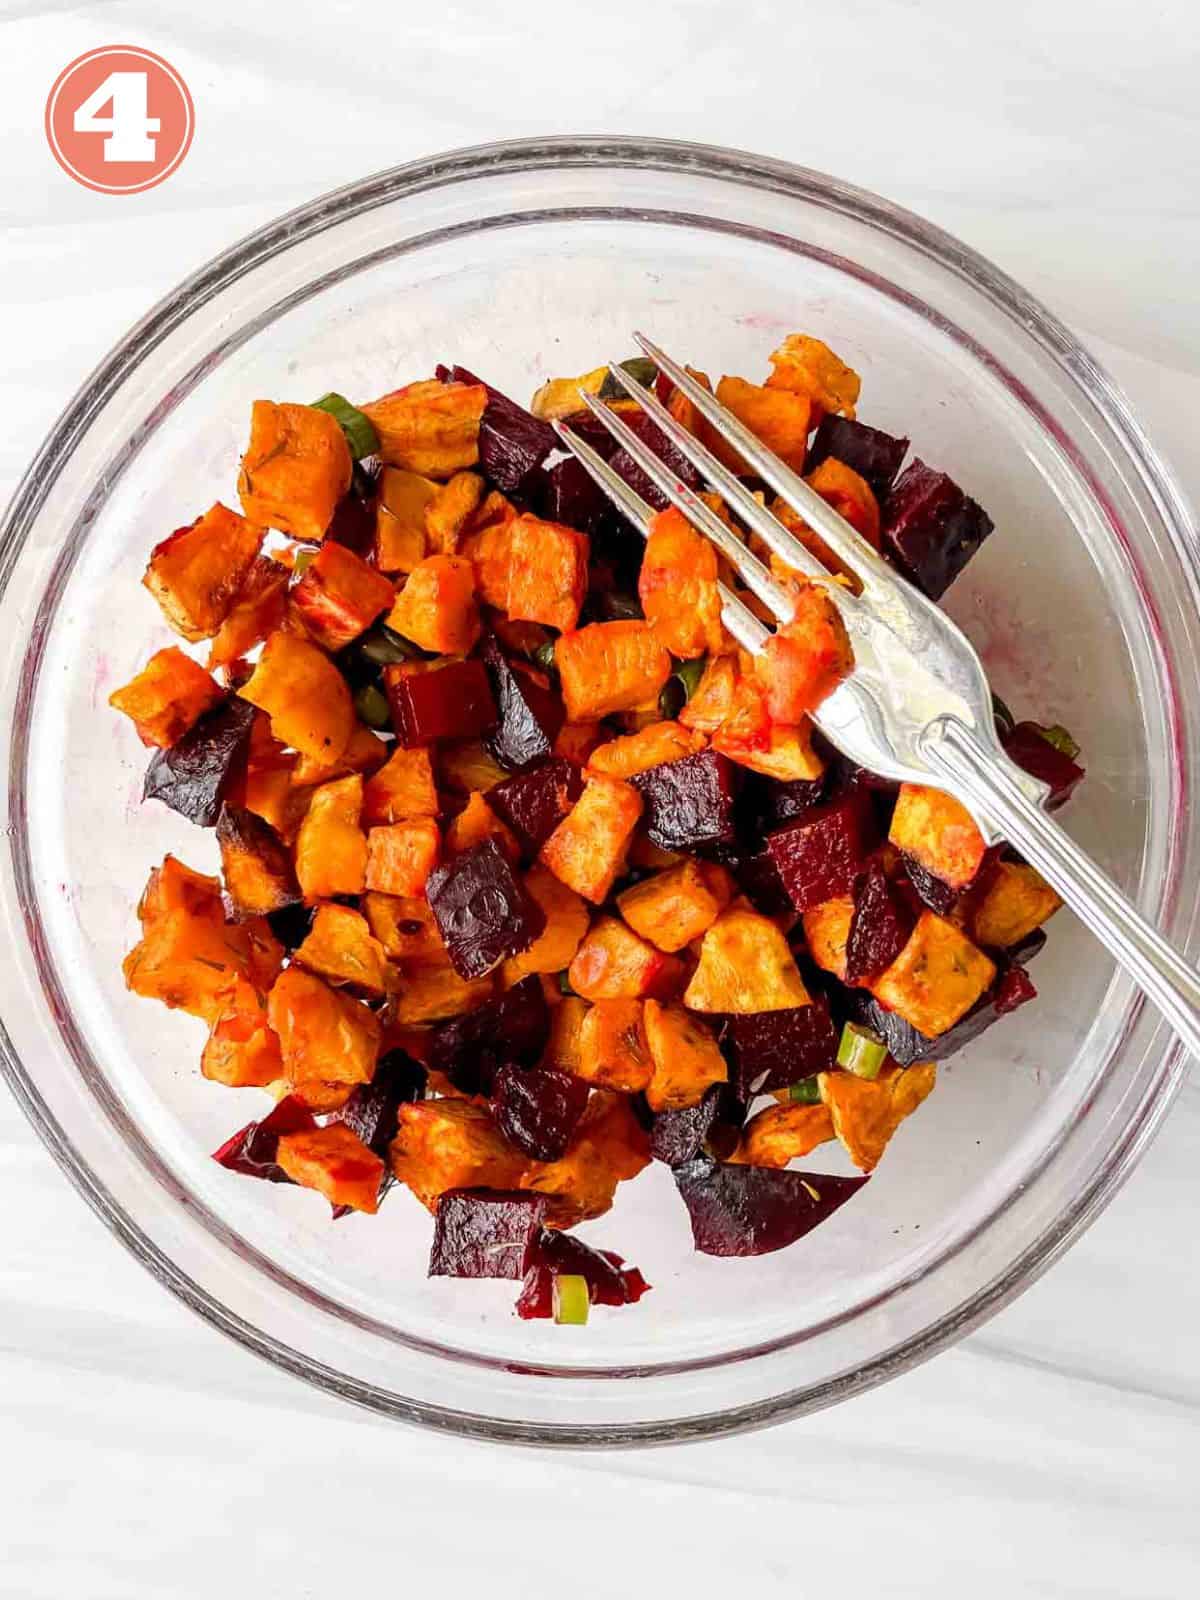 diced sweet potato cubes and diced beets in a glass bowl with a fork labelled number four.